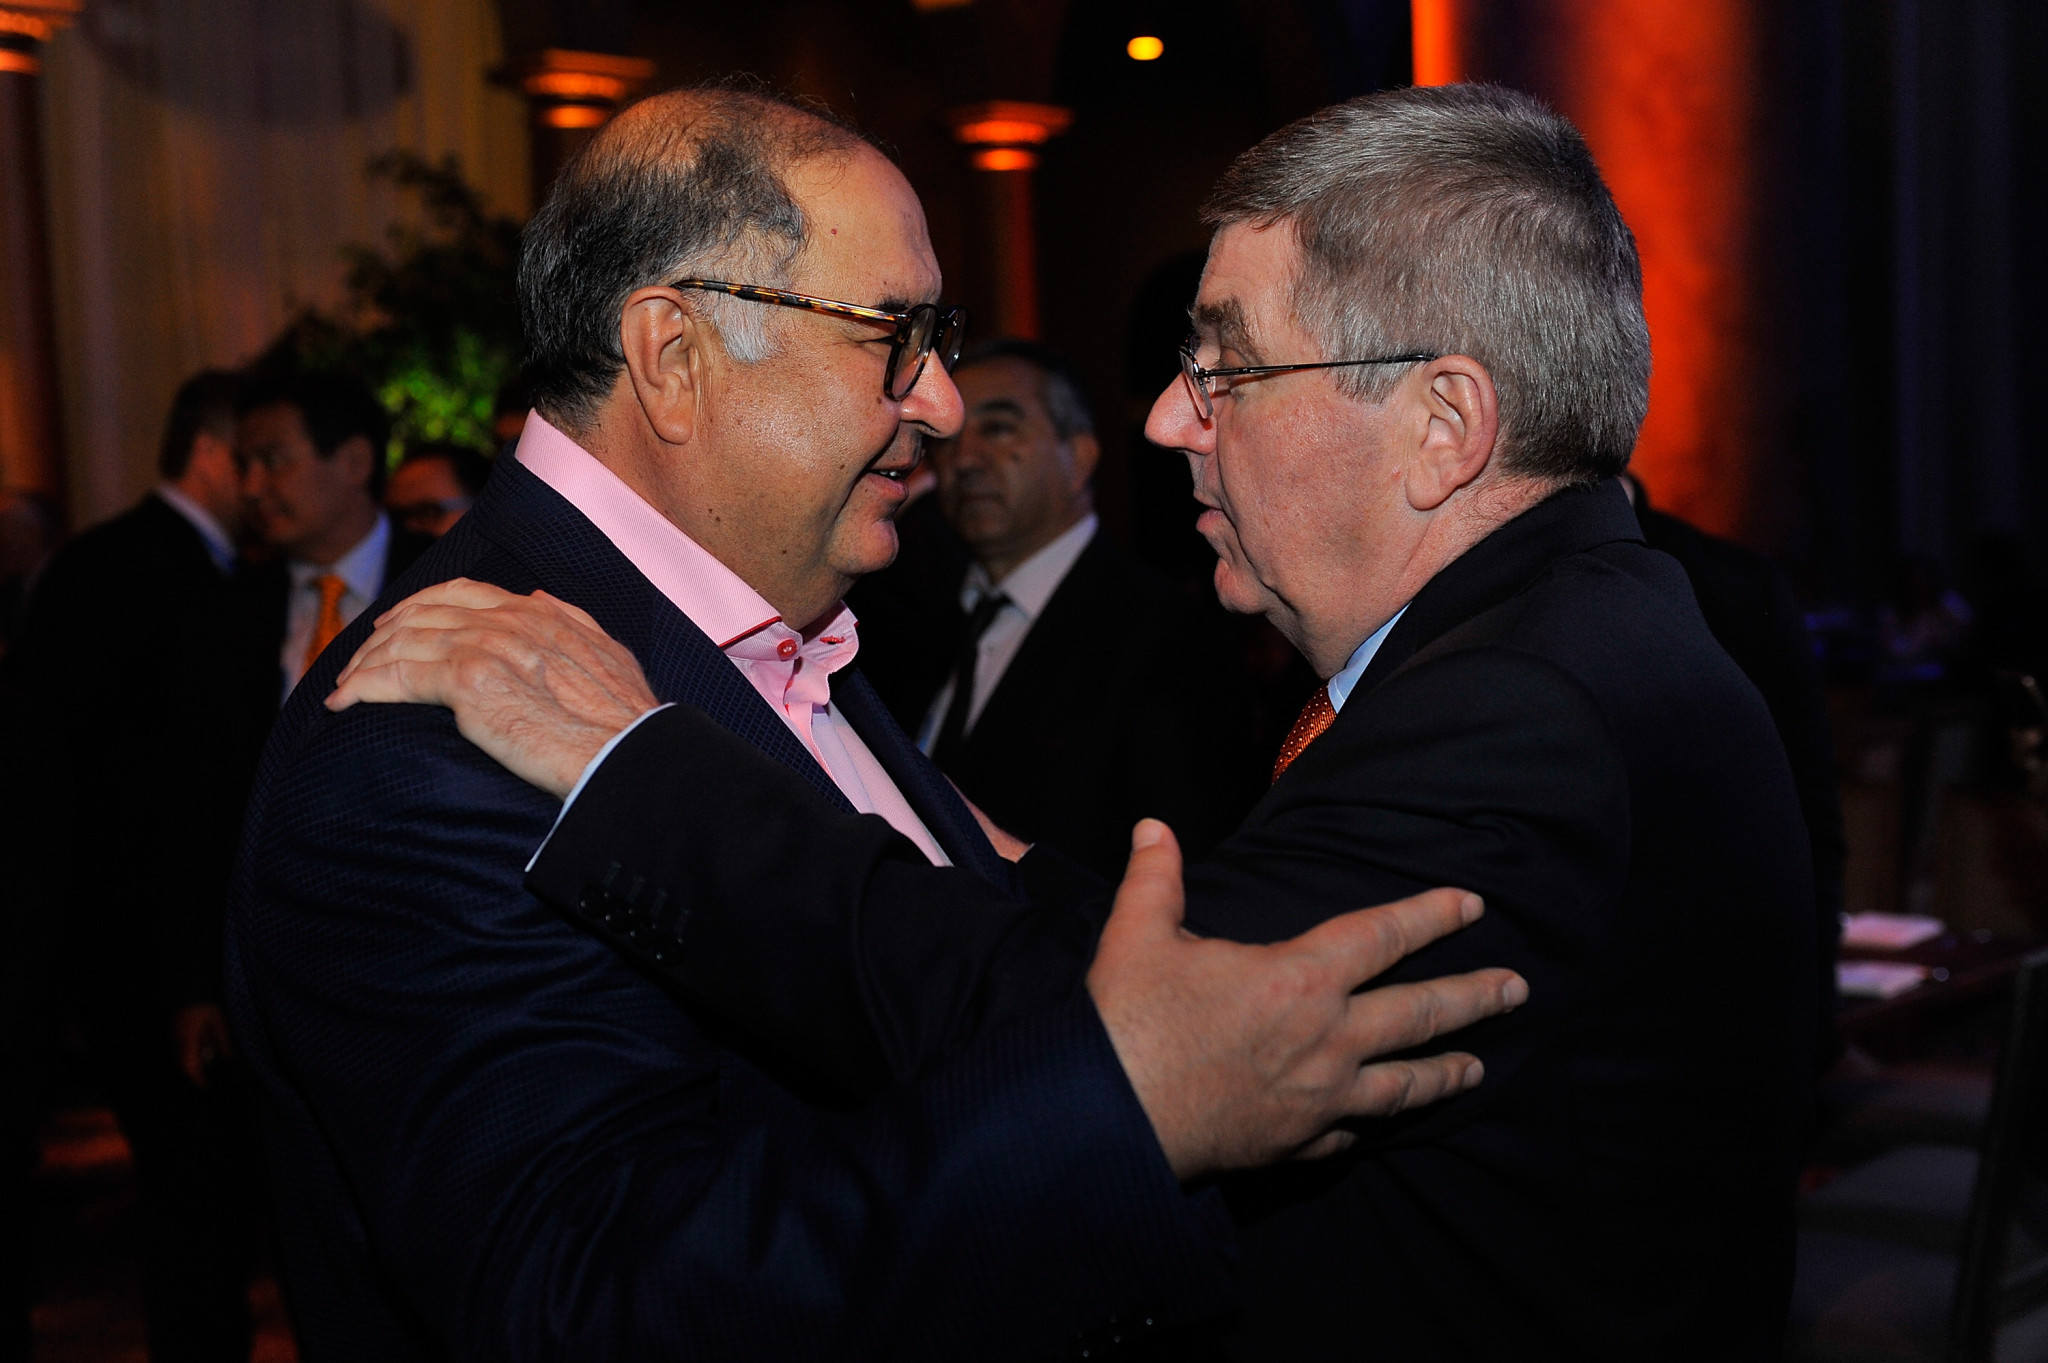 Alisher Usmanov, left, with IOC President Thomas Bach in 2015 ©Getty Images